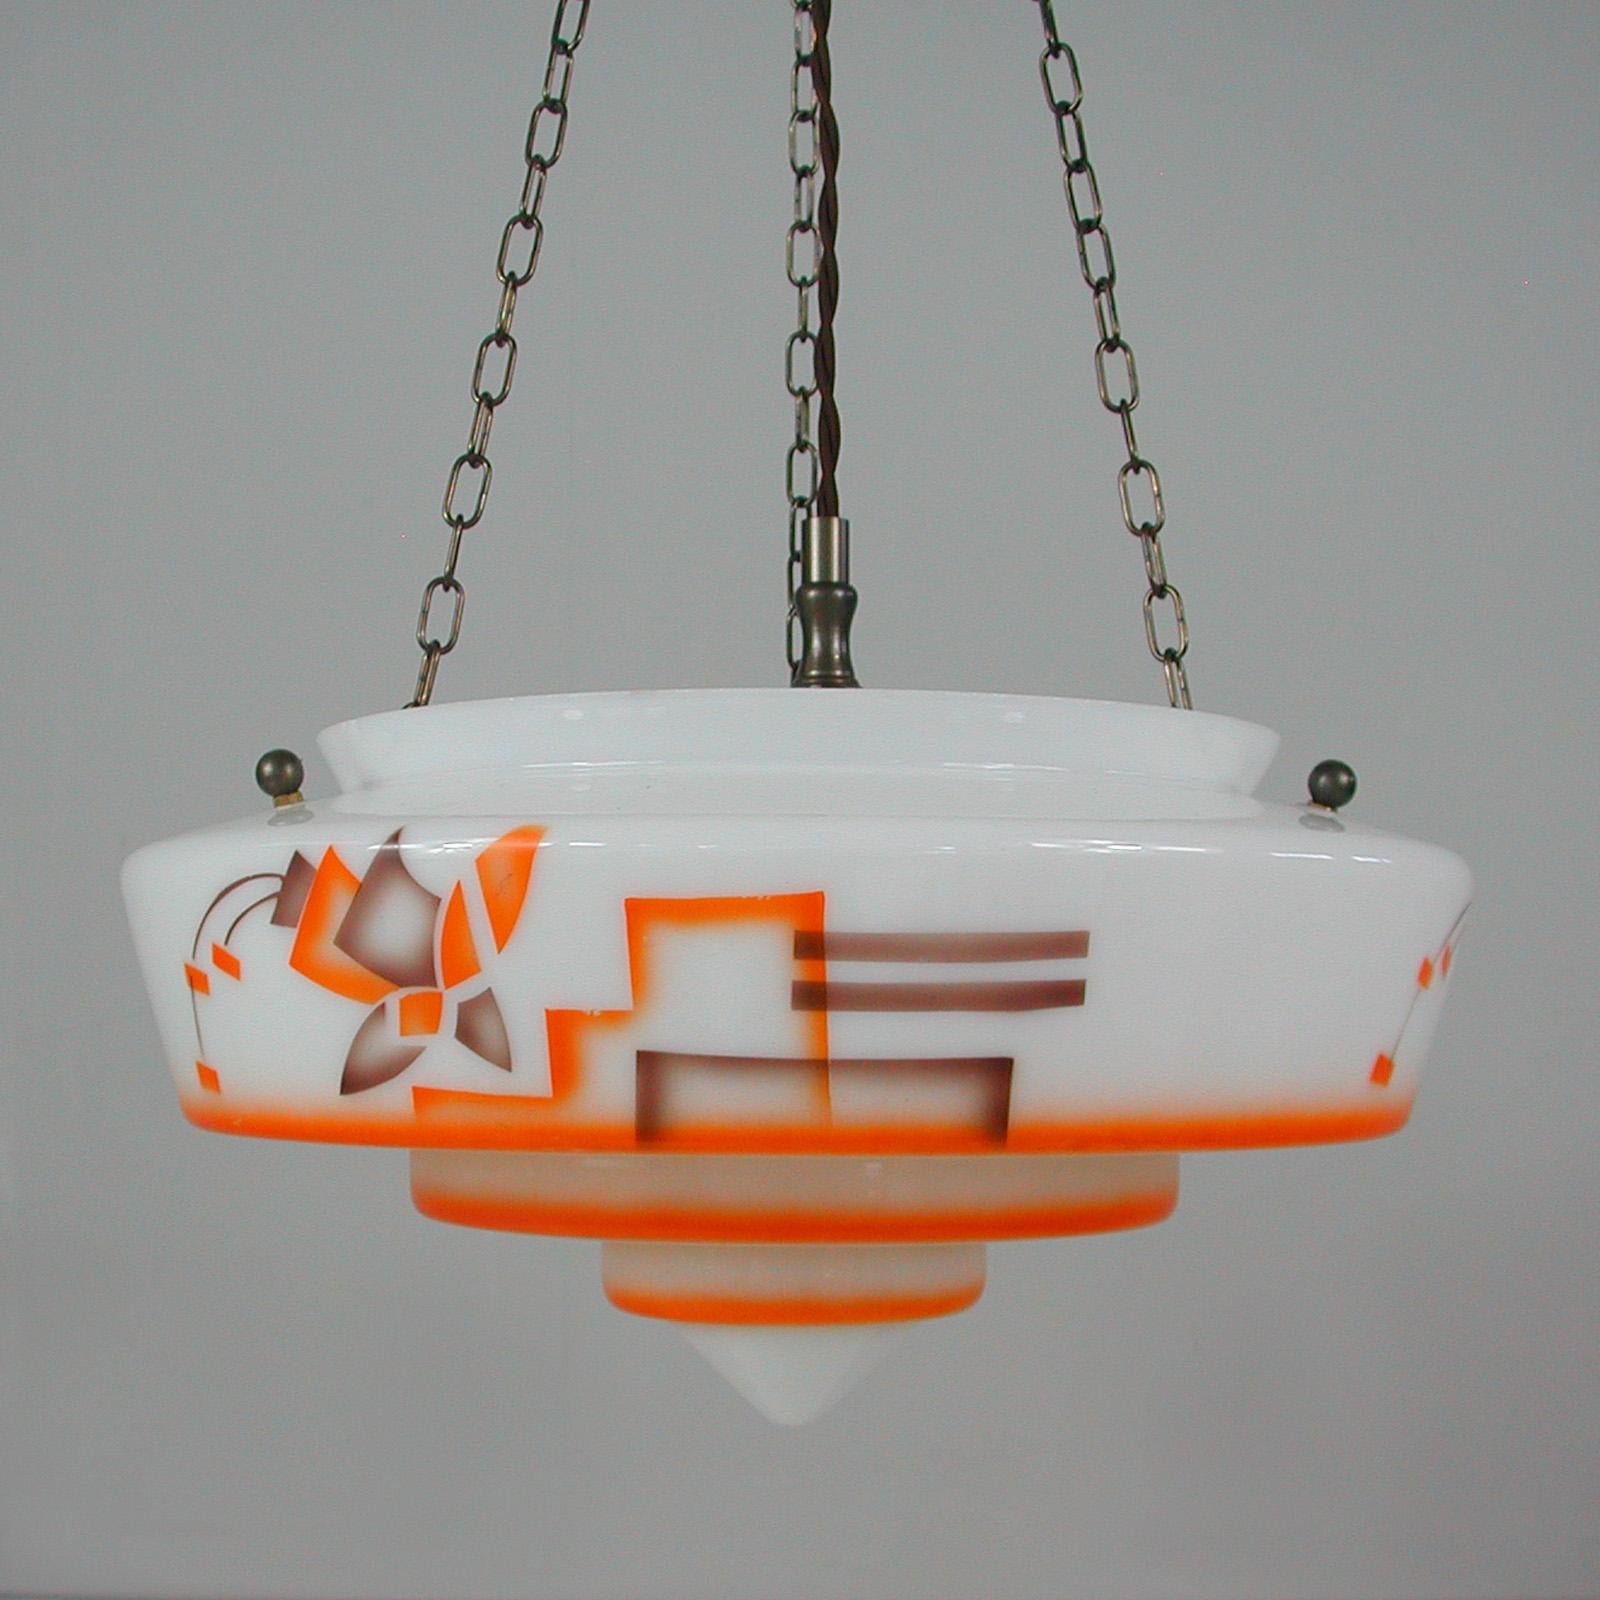 German Art Deco Suspension Light, Enameled Glass and Brass, 1930s For Sale 3